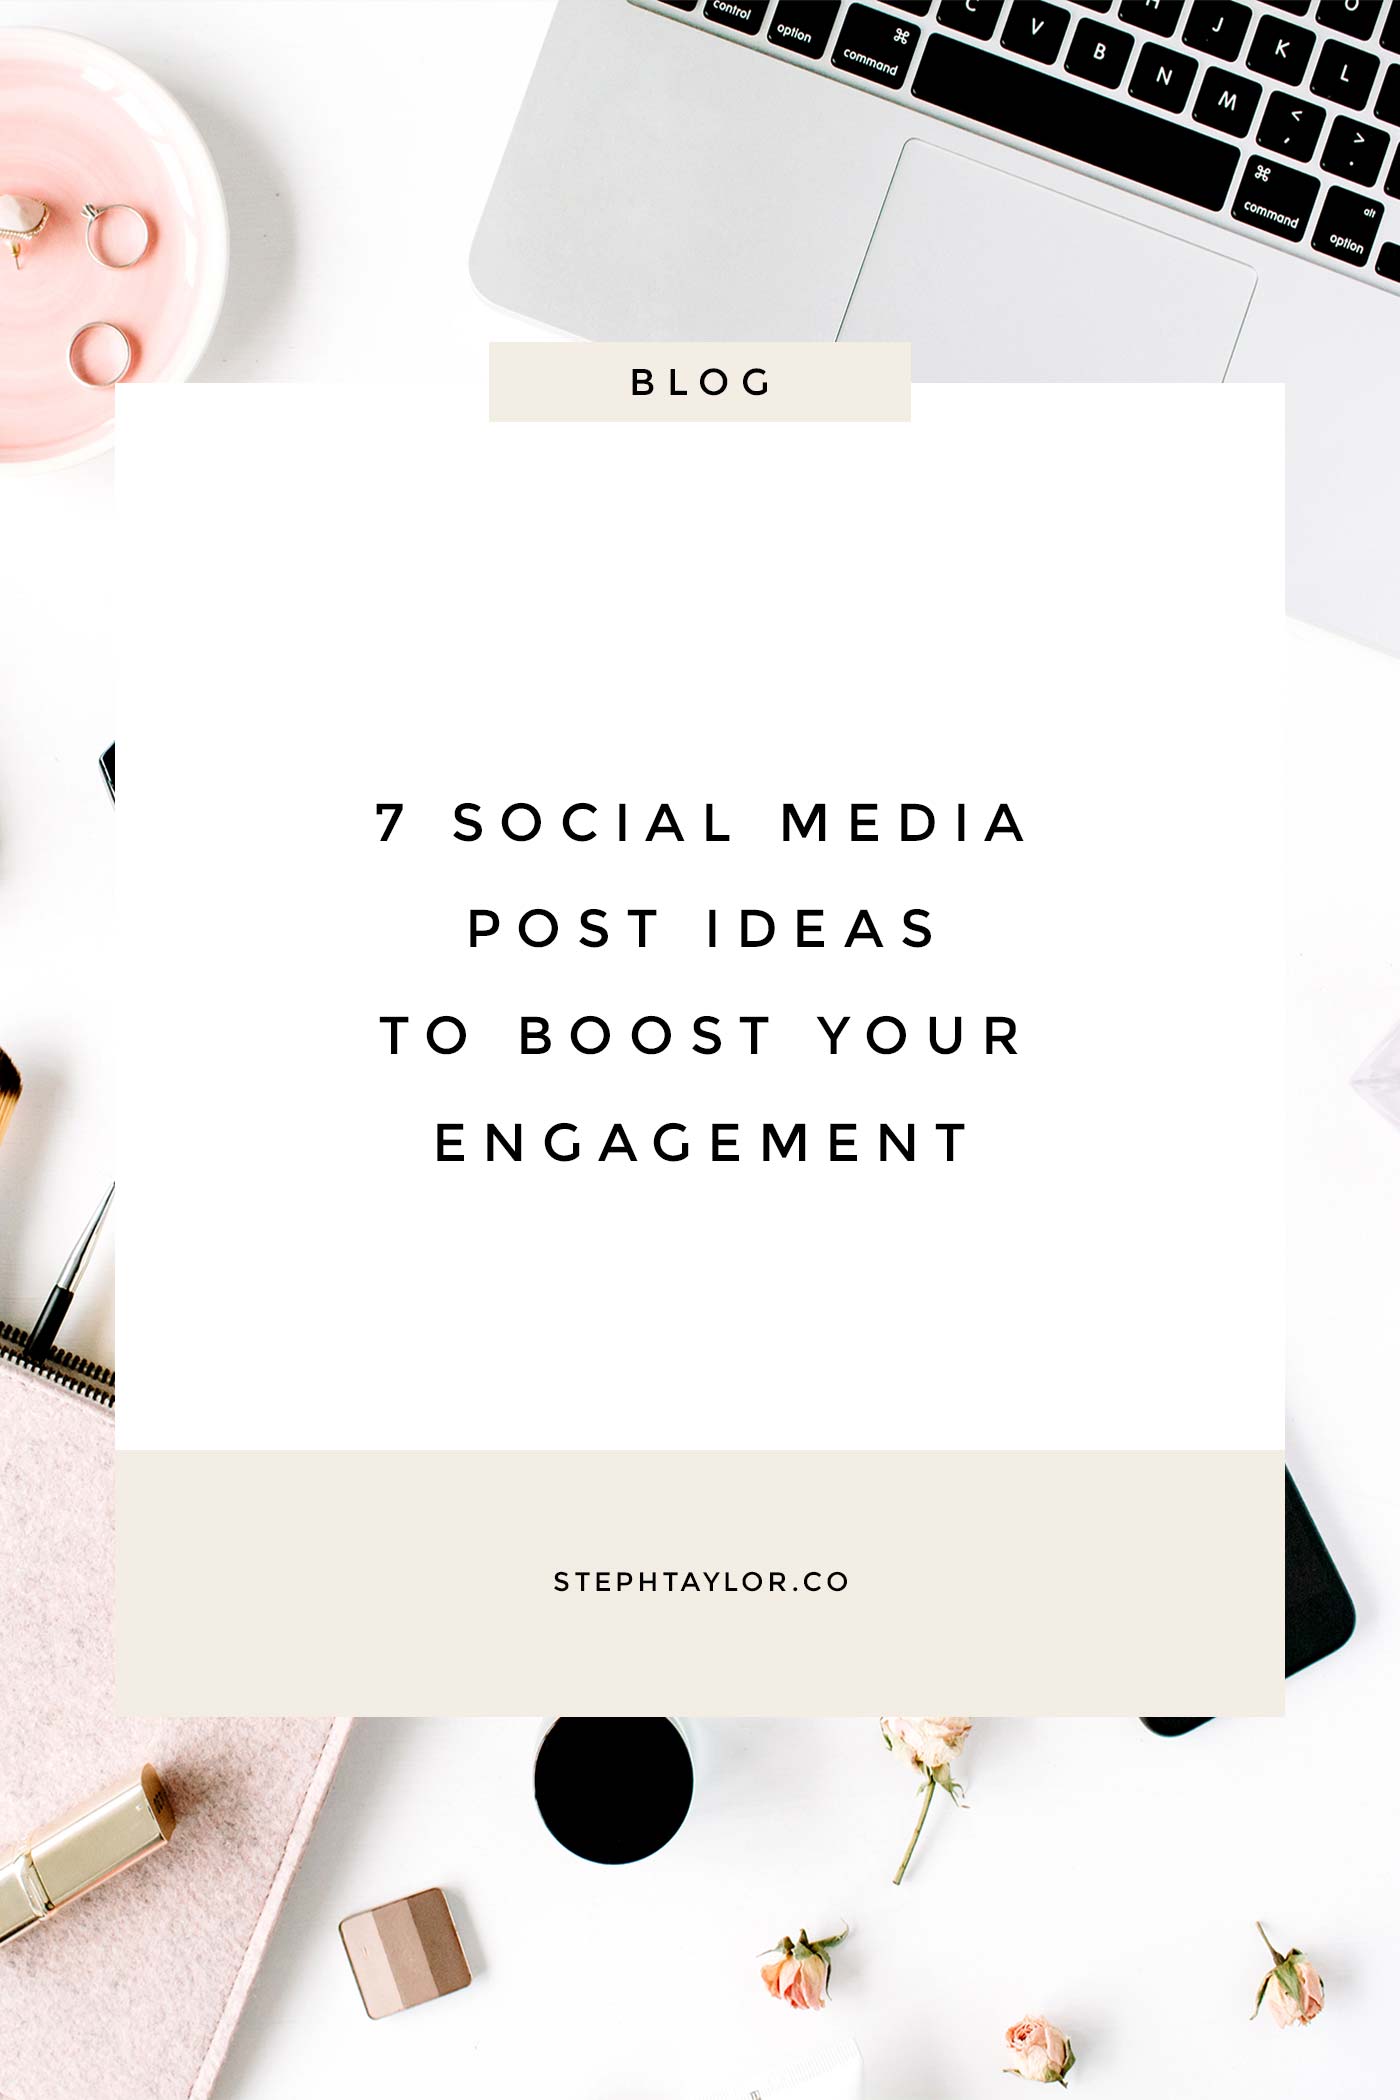 Social media post ideas to boost engagement